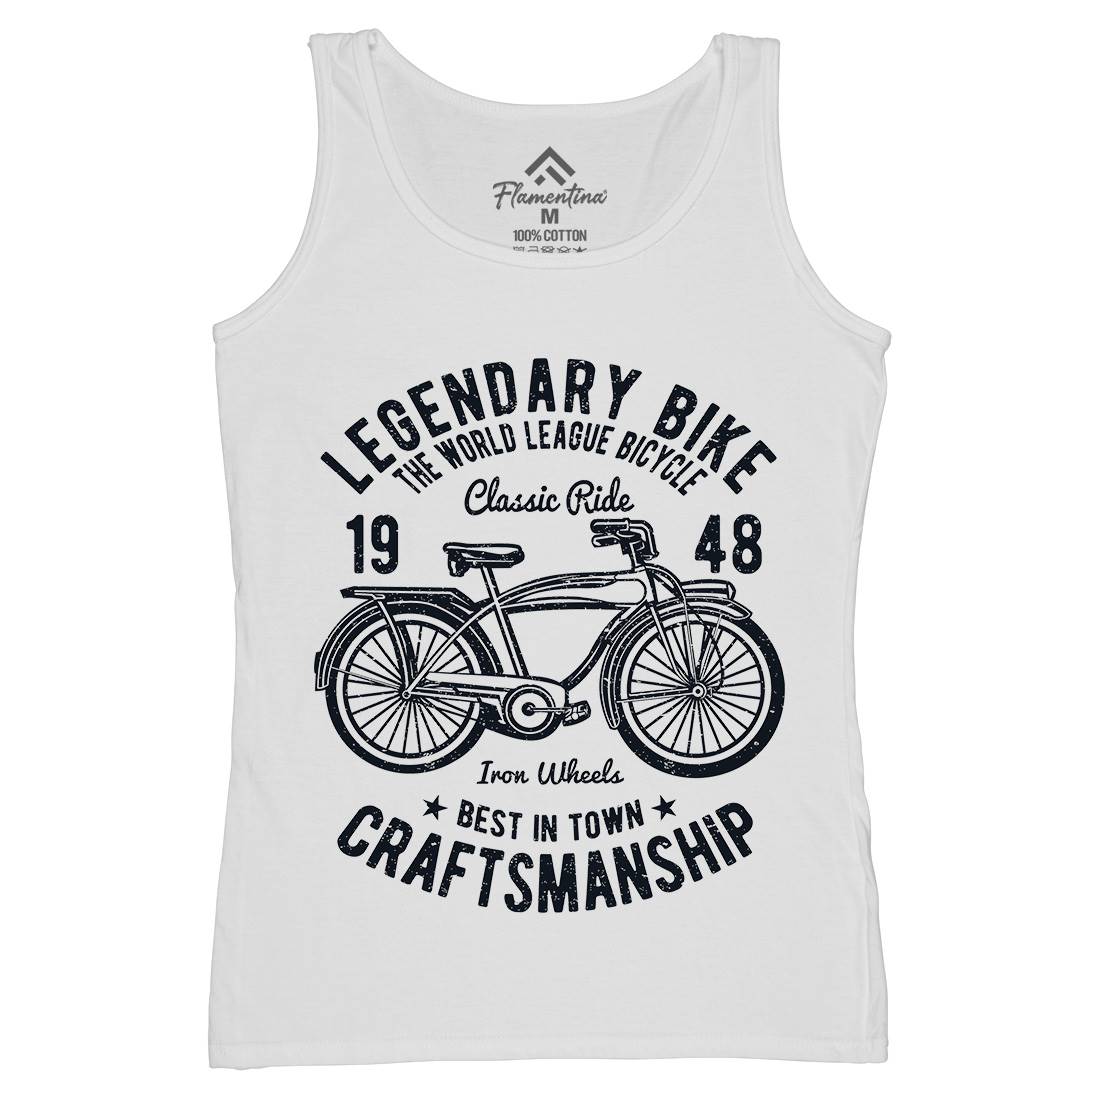 Classic Bicycle Womens Organic Tank Top Vest Bikes A035